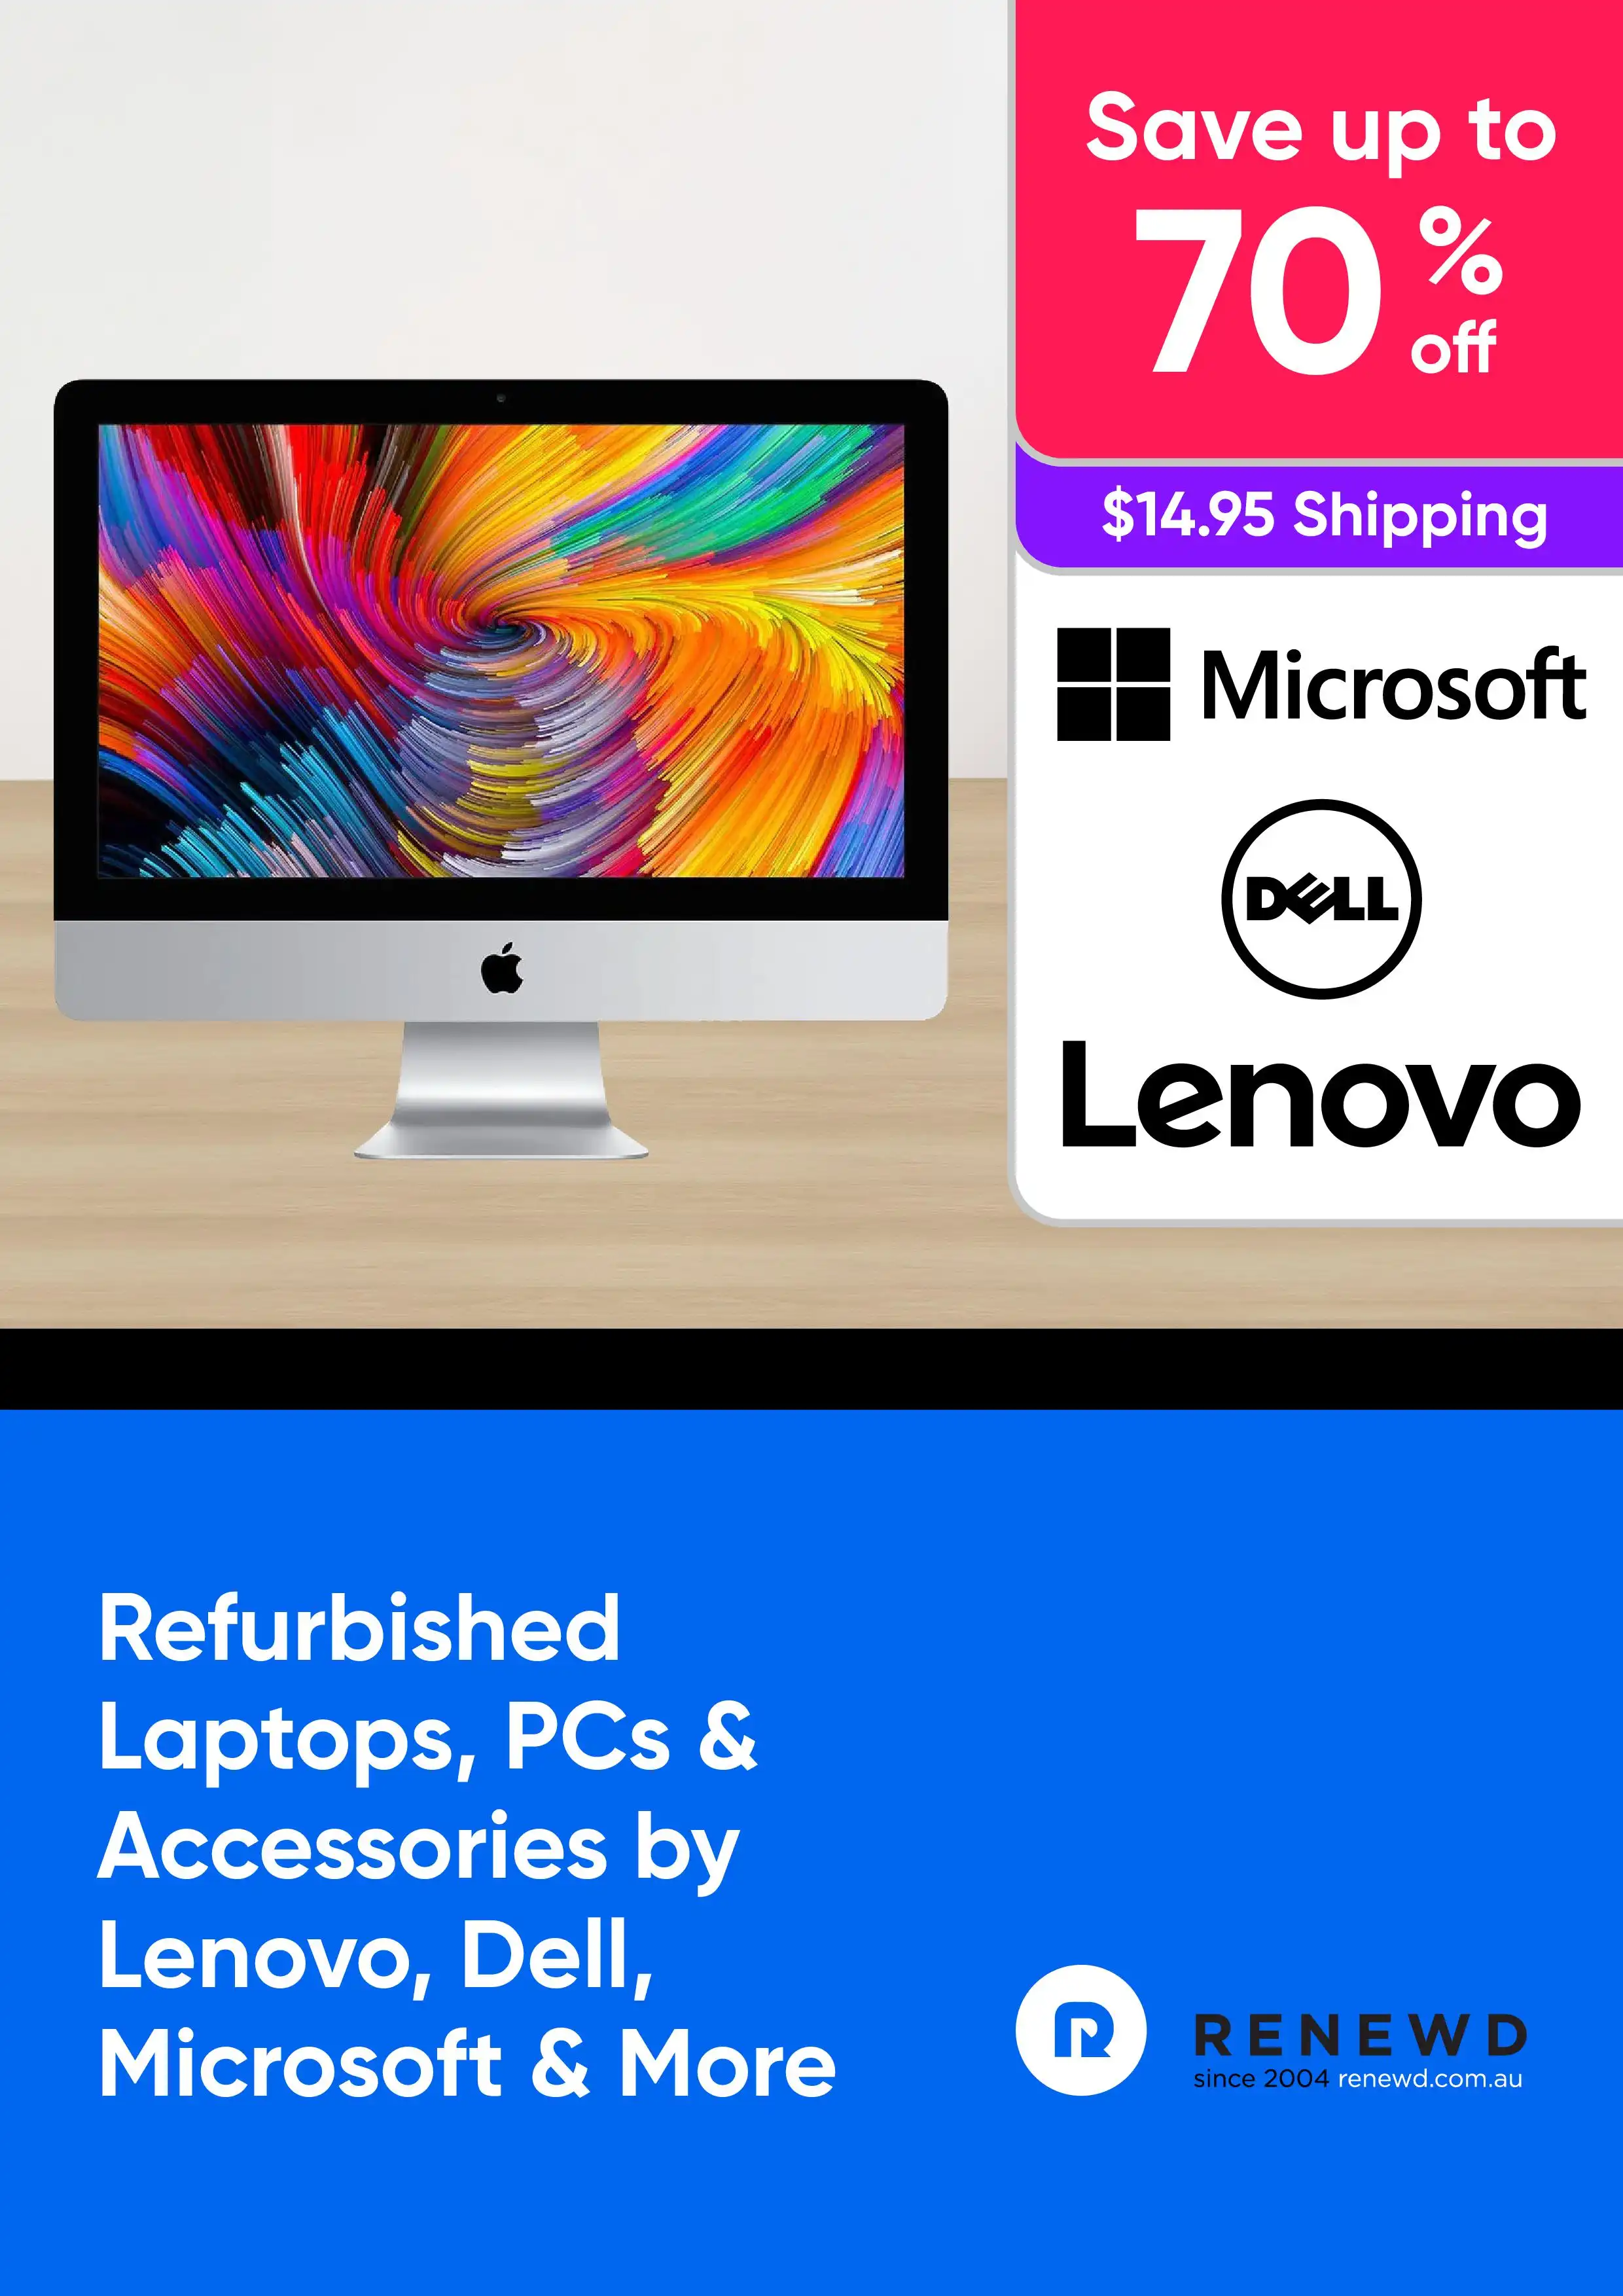 Save Up to 70% on a Range of Refurbished Laptops, PCs and Accessories by Lenovo, Microsoft and More